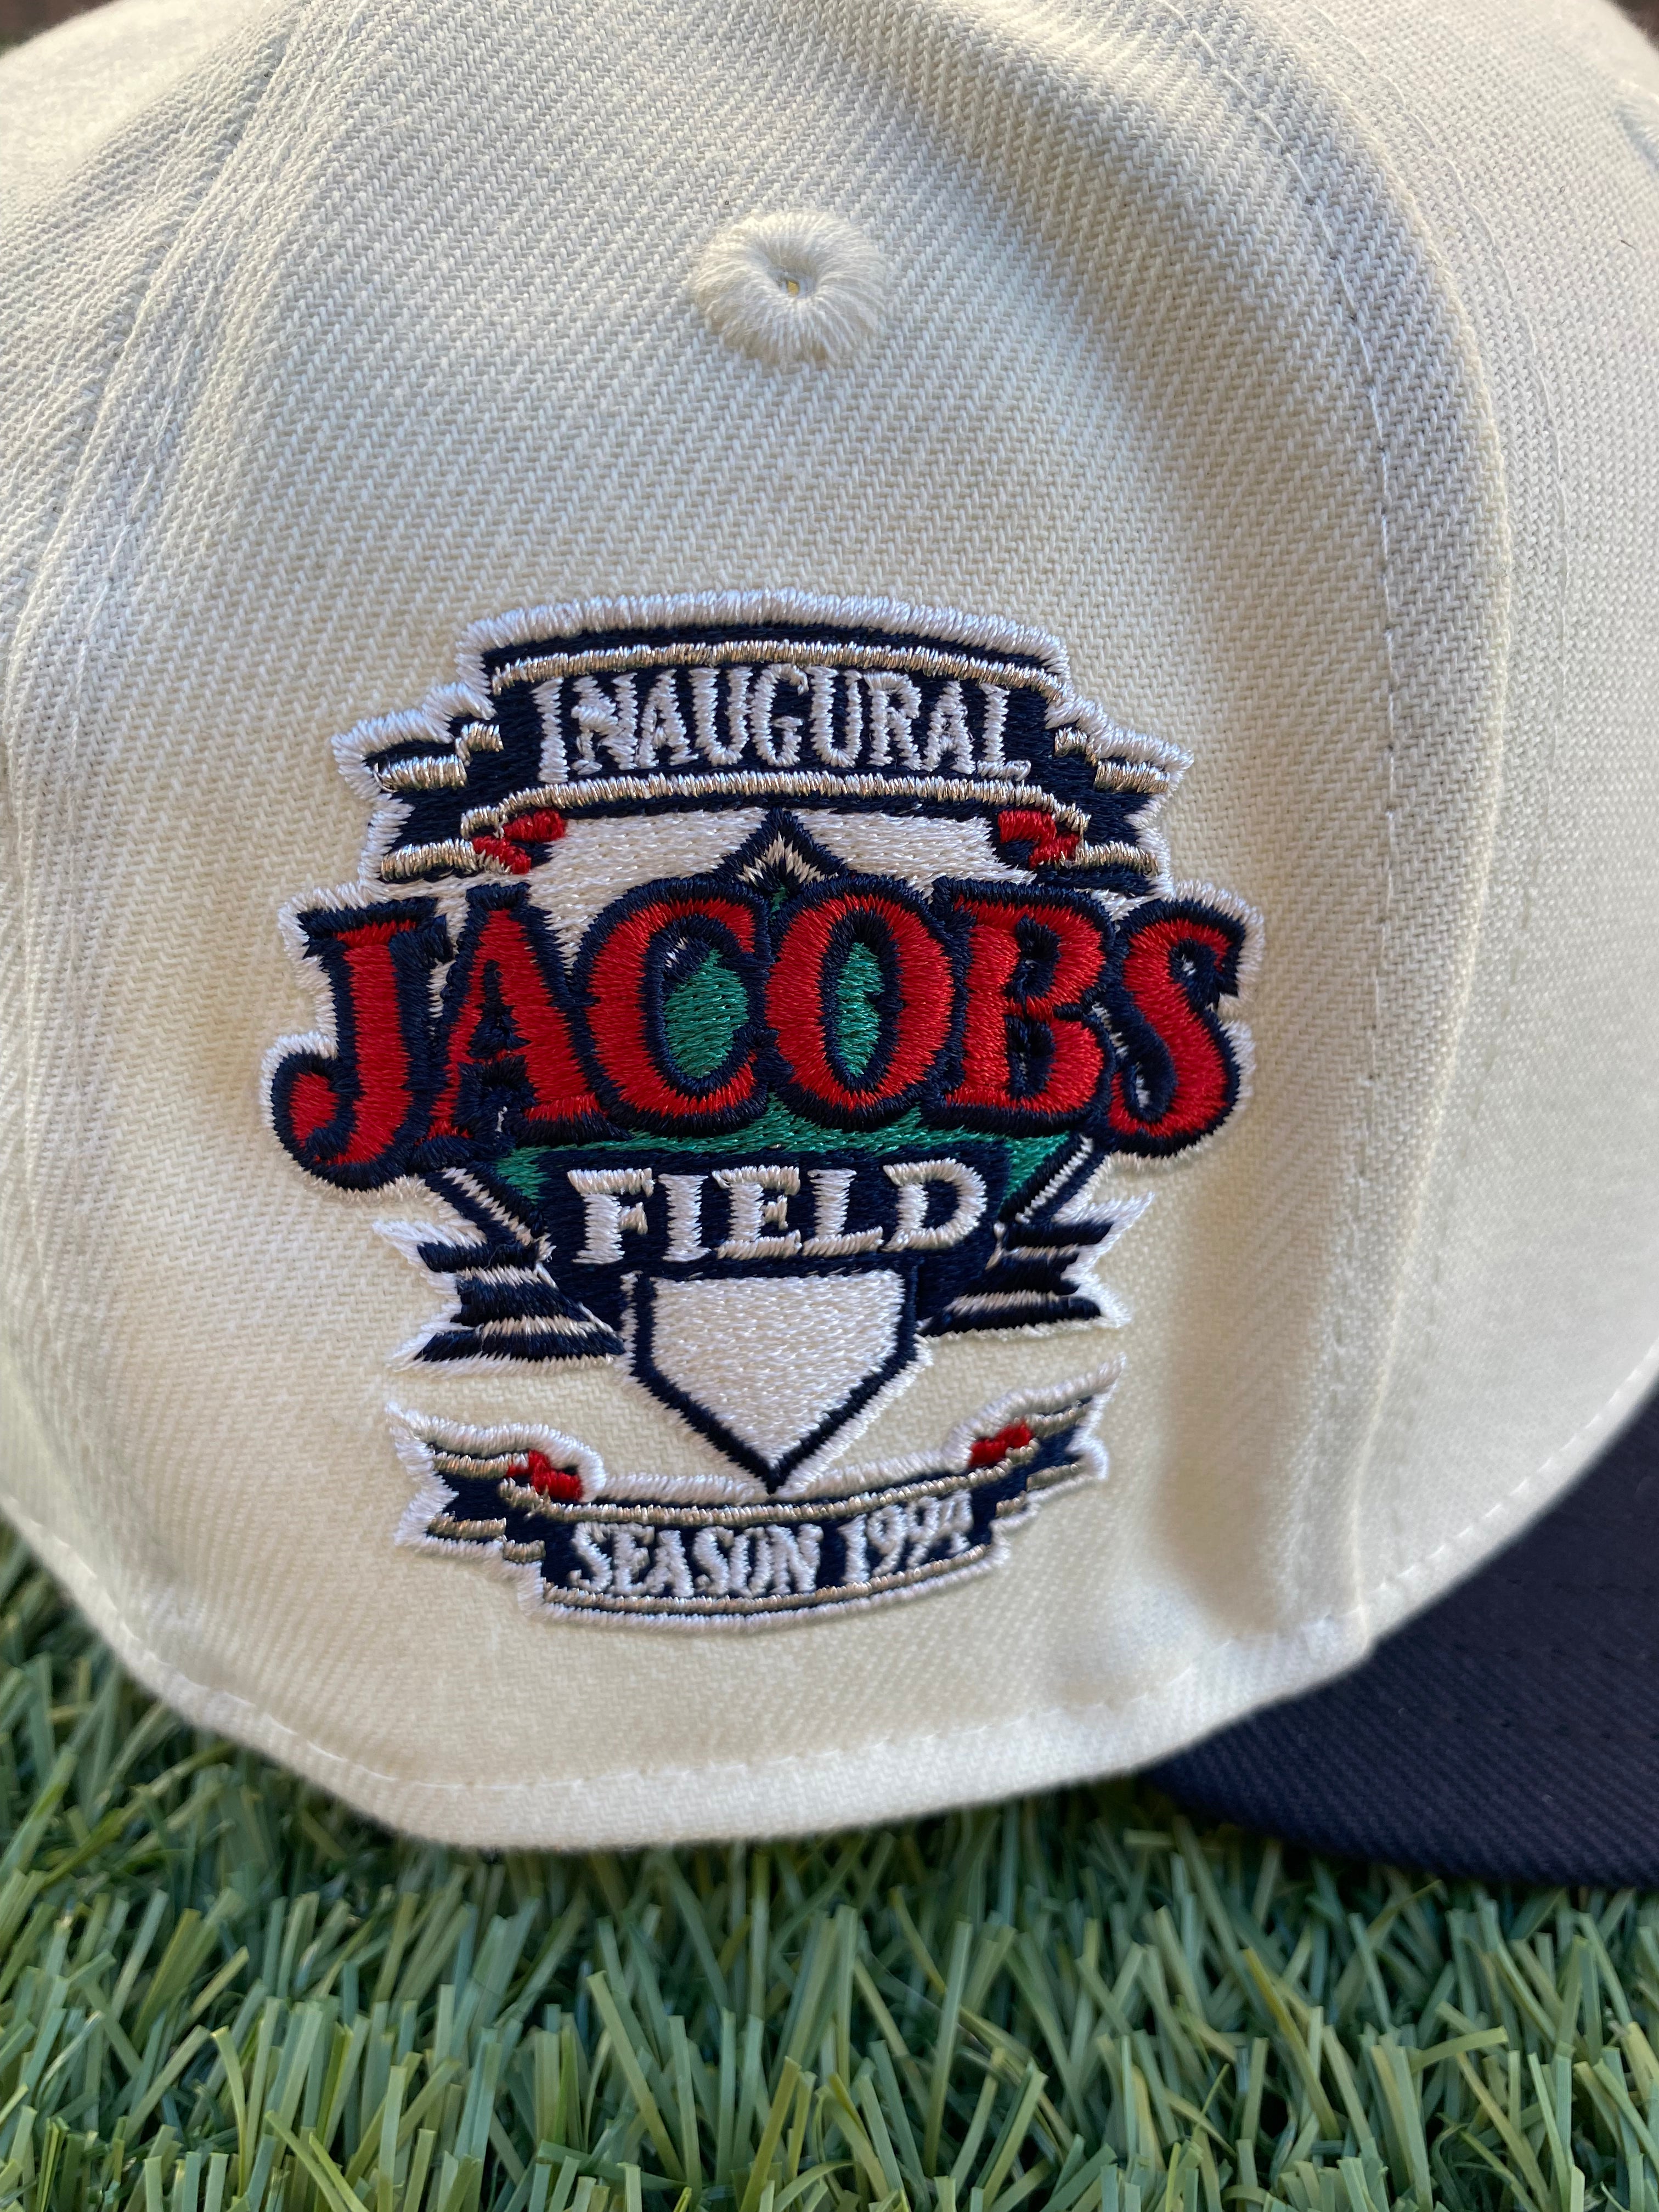 New Era Cleveland Indians Aux Pack Vol 2 Jacobs Field Patch Hat Club Exclusive 59FIFTY Fitted Hat Black/Red